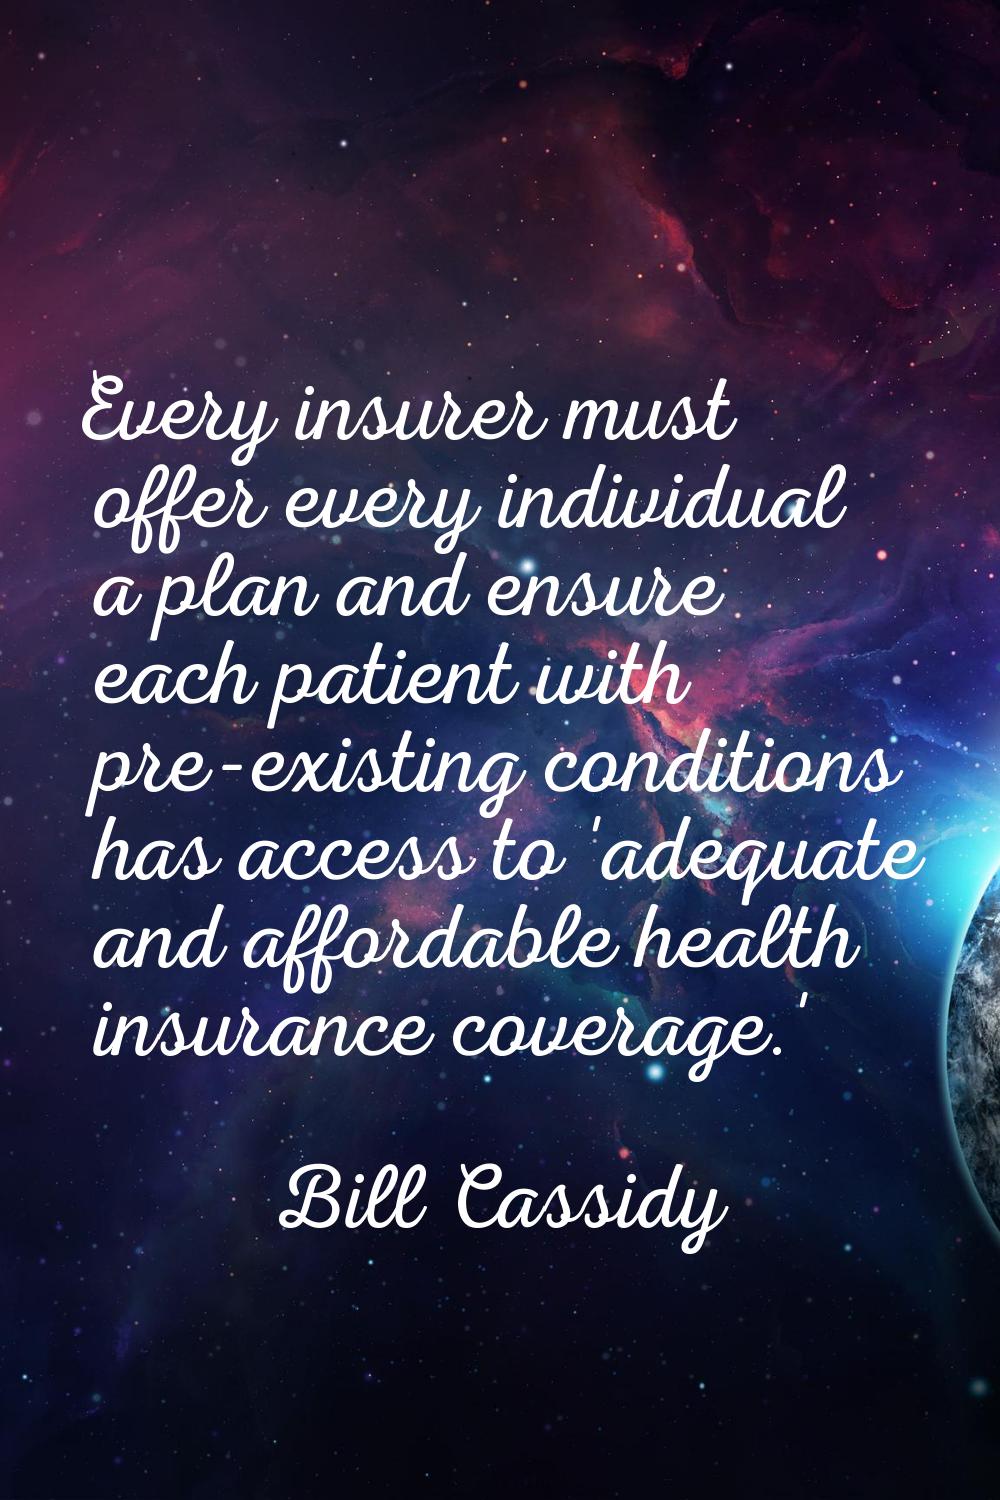 Every insurer must offer every individual a plan and ensure each patient with pre-existing conditio